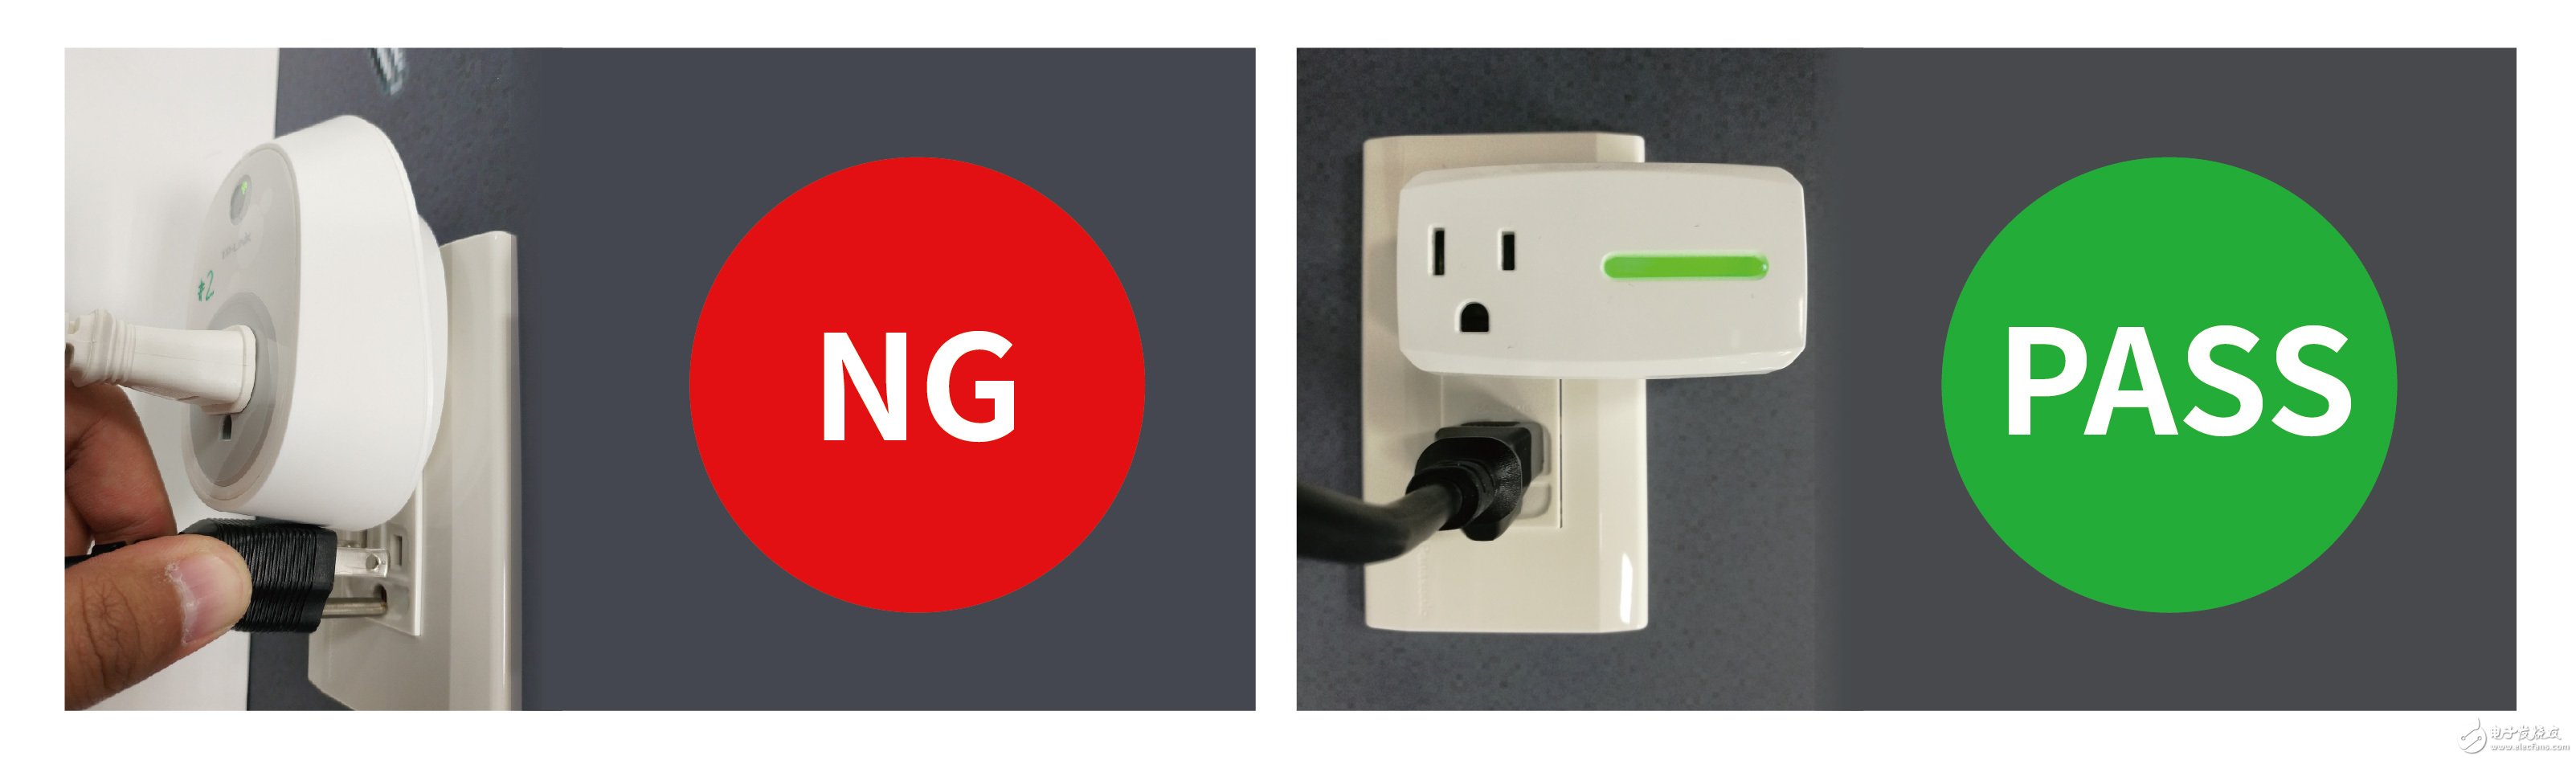 Smart home essentials, how smart is the smart socket and easy to use